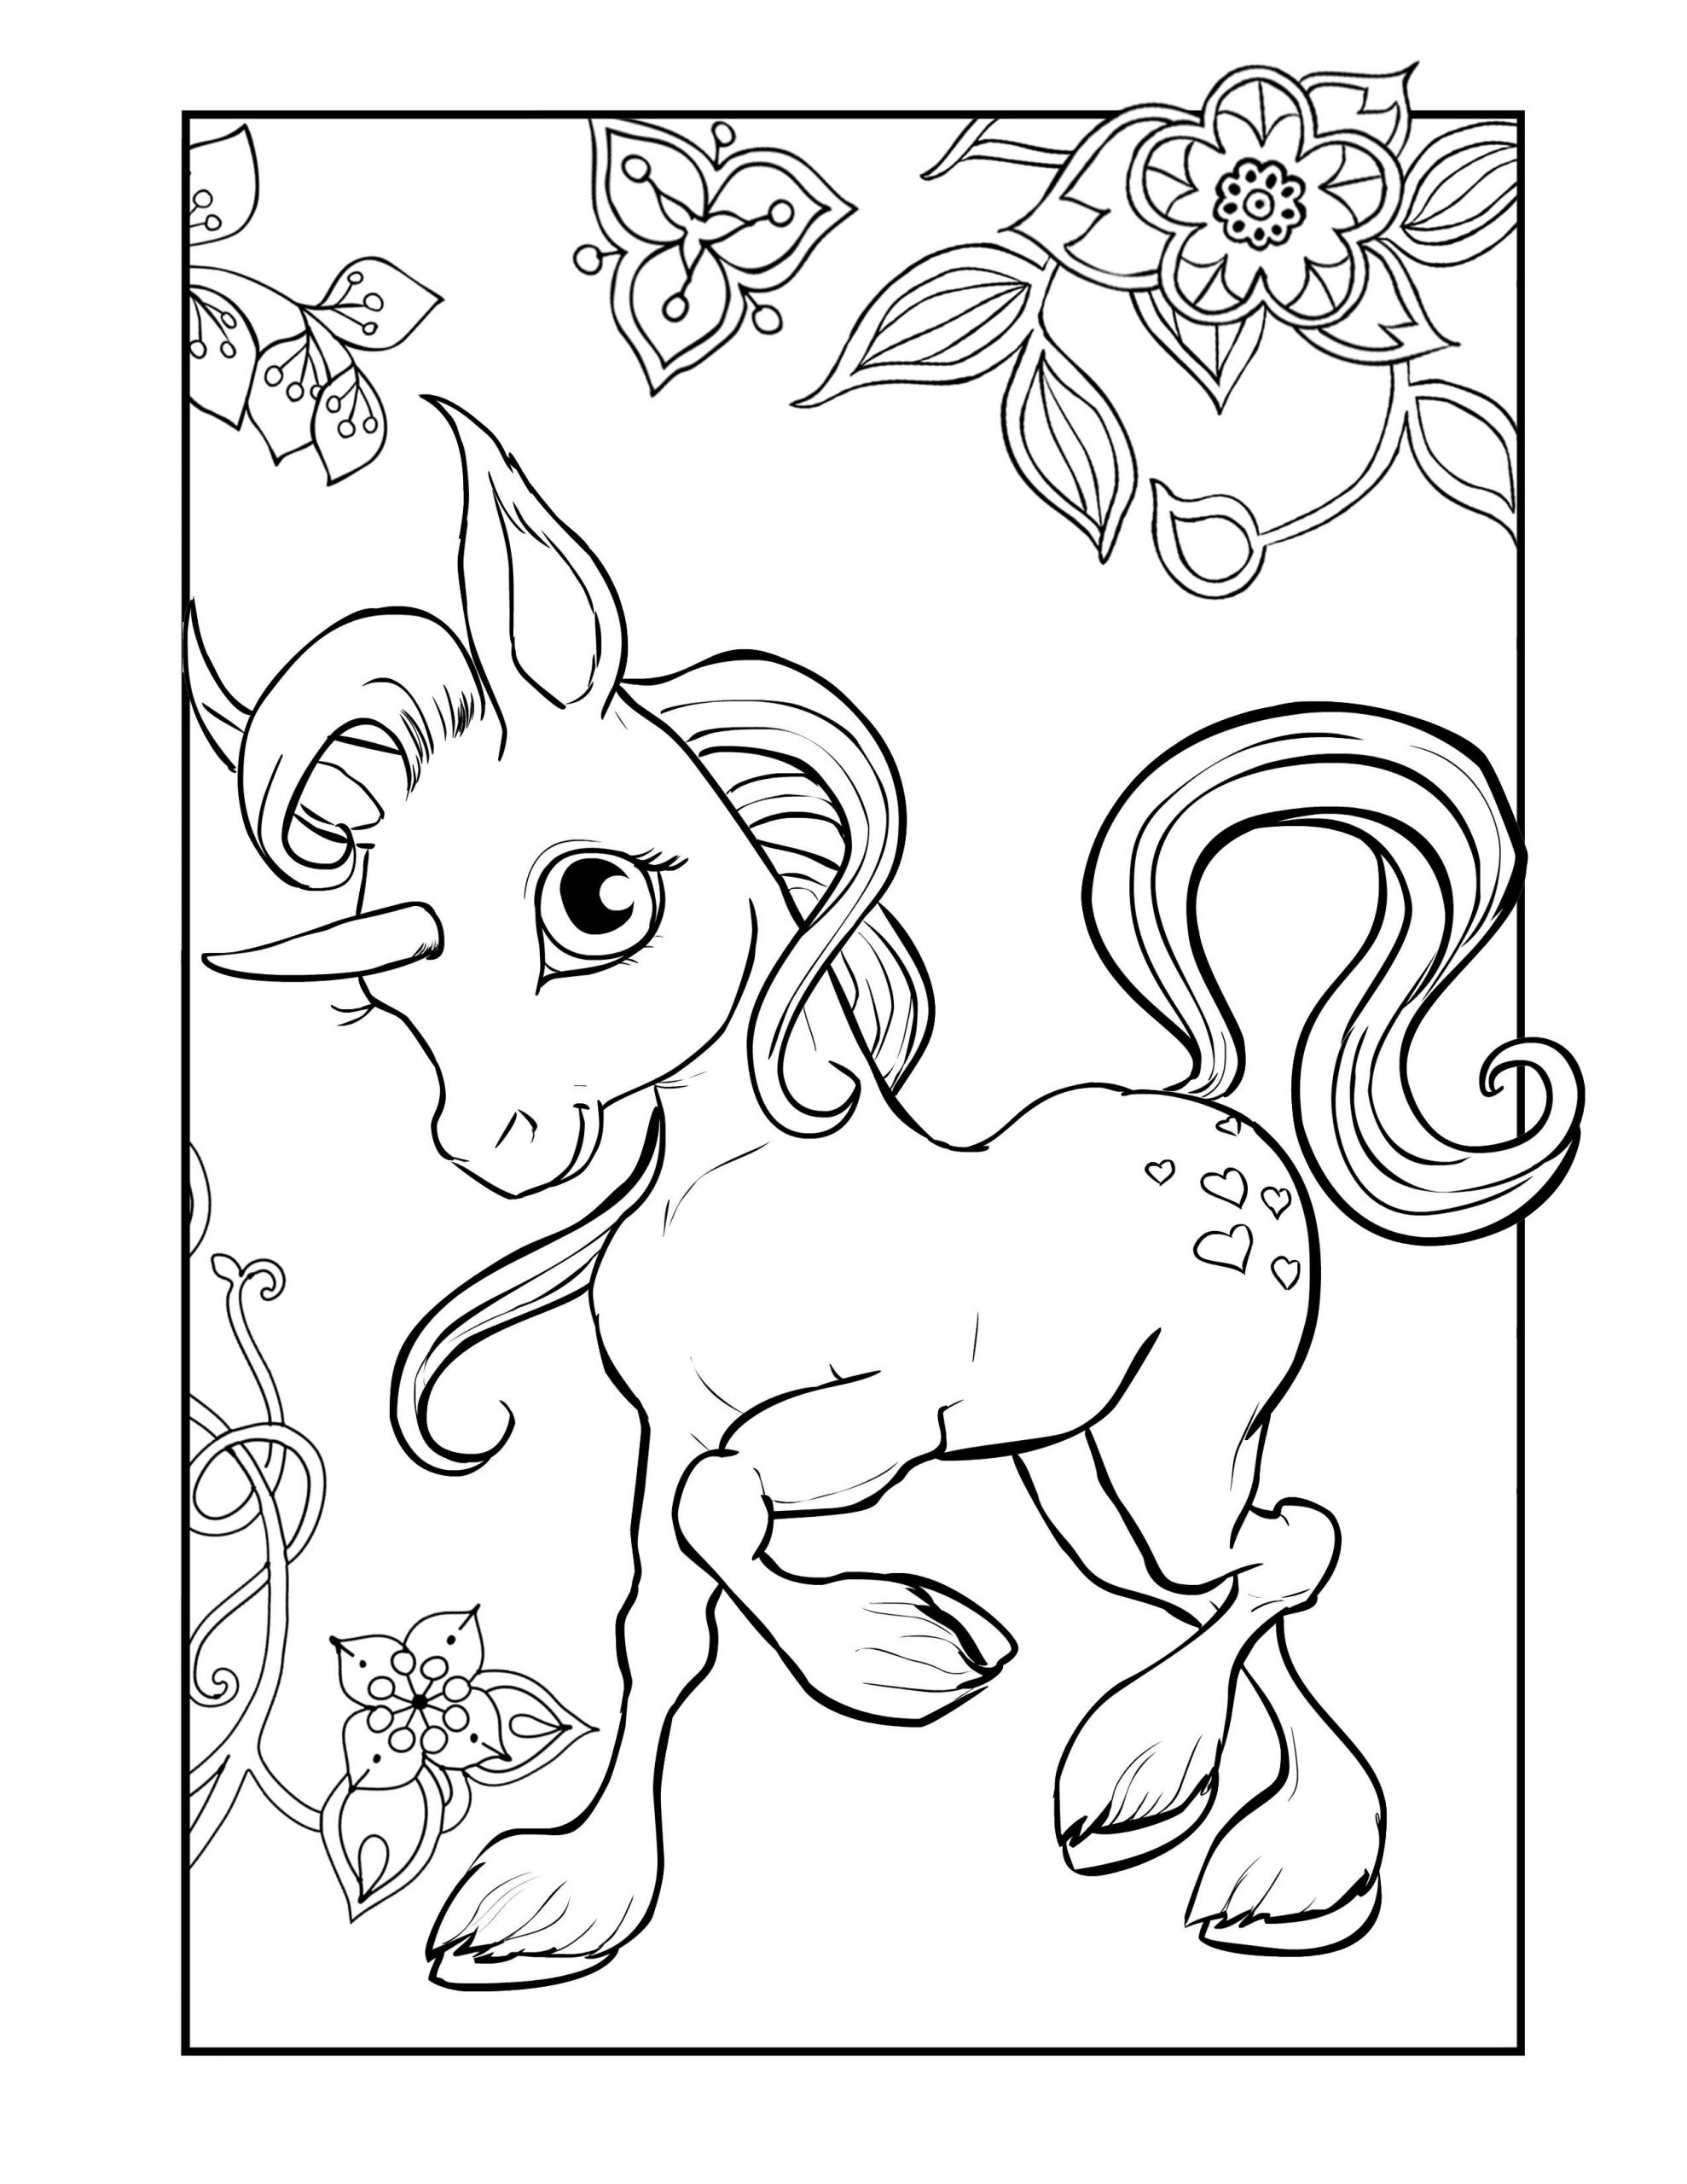 Download Top 25 Unicorn Coloring Pages for Girls - Home, Family ...